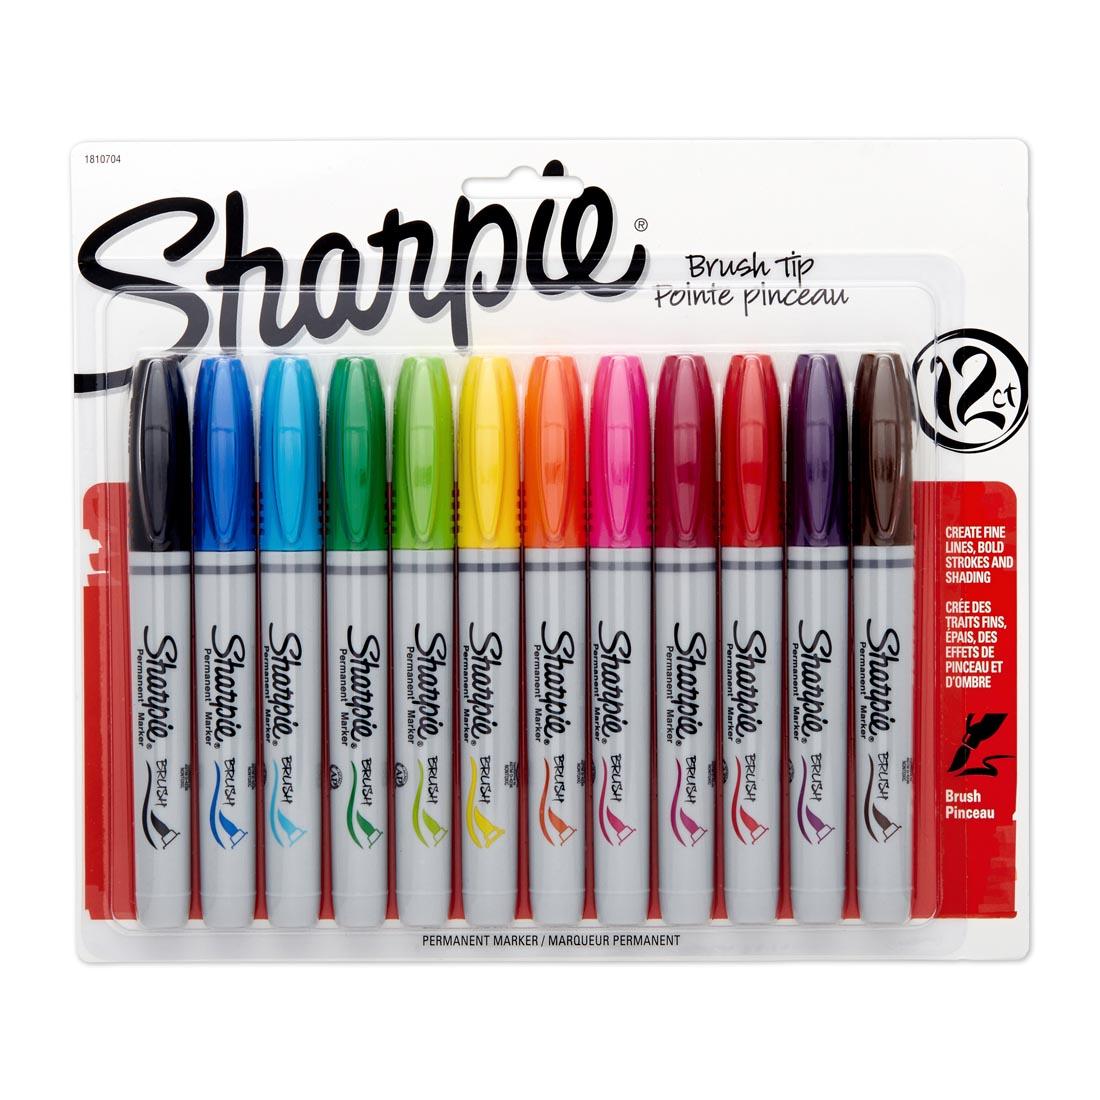 Sharpie Brush Tip Permanent Marker 12-Color Set shown in package with an uncapped black brush marker above it